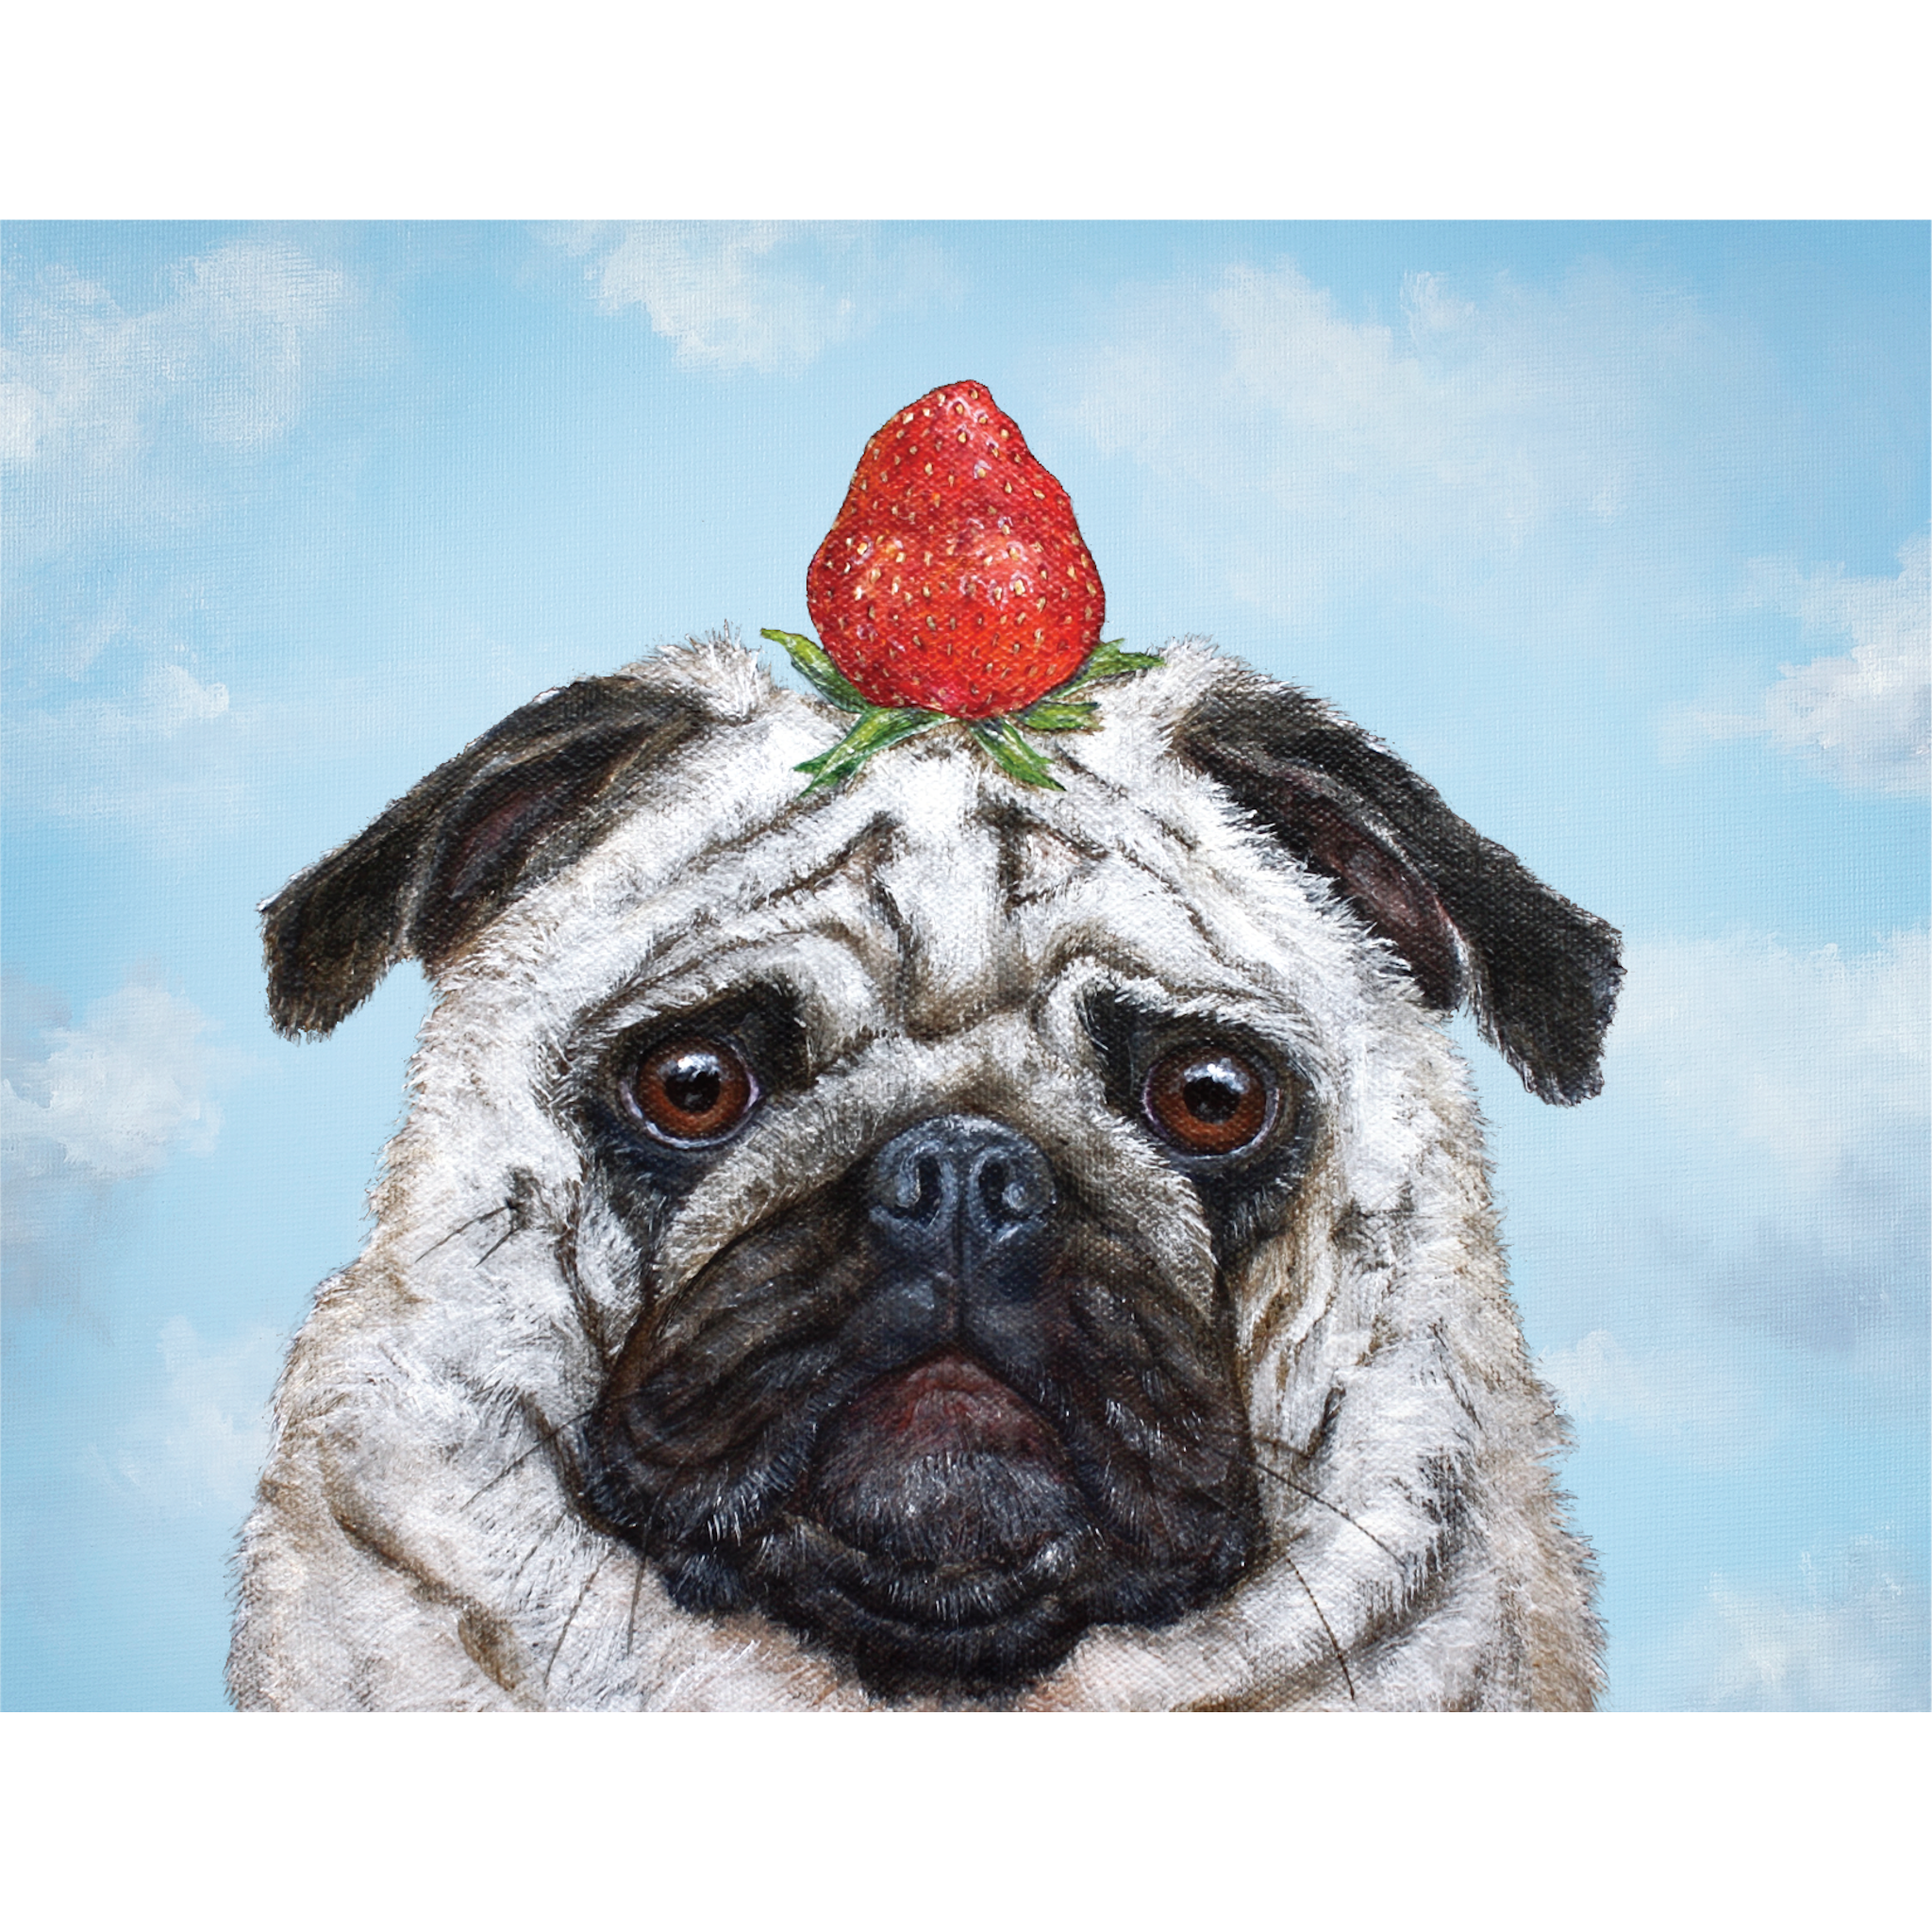 A Hester &amp; Cook Strawberry Pug adorned with a strawberry on his head, perfect for a unique greeting card.